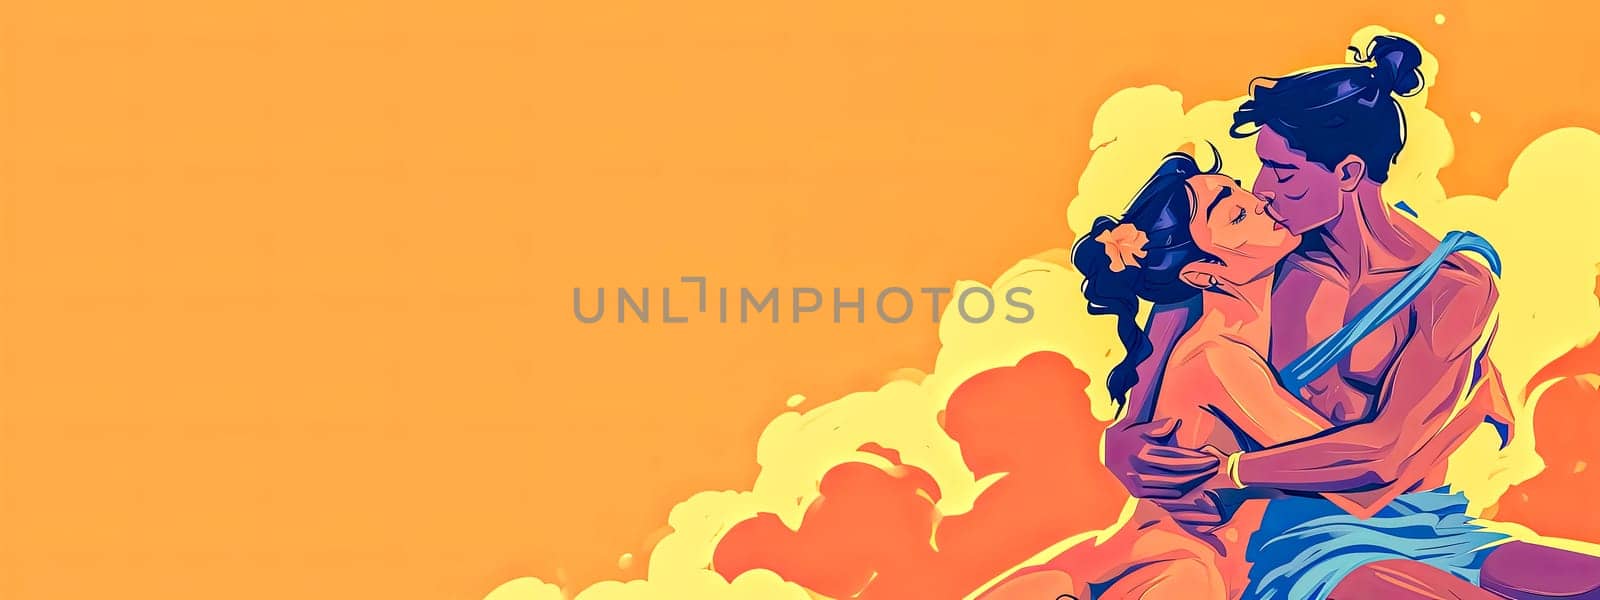 kamasutra, couple in a loving embrace, set against a vibrant orange cloud-like background, ideal for a romantic or Valentine's Day themed banner. by Edophoto